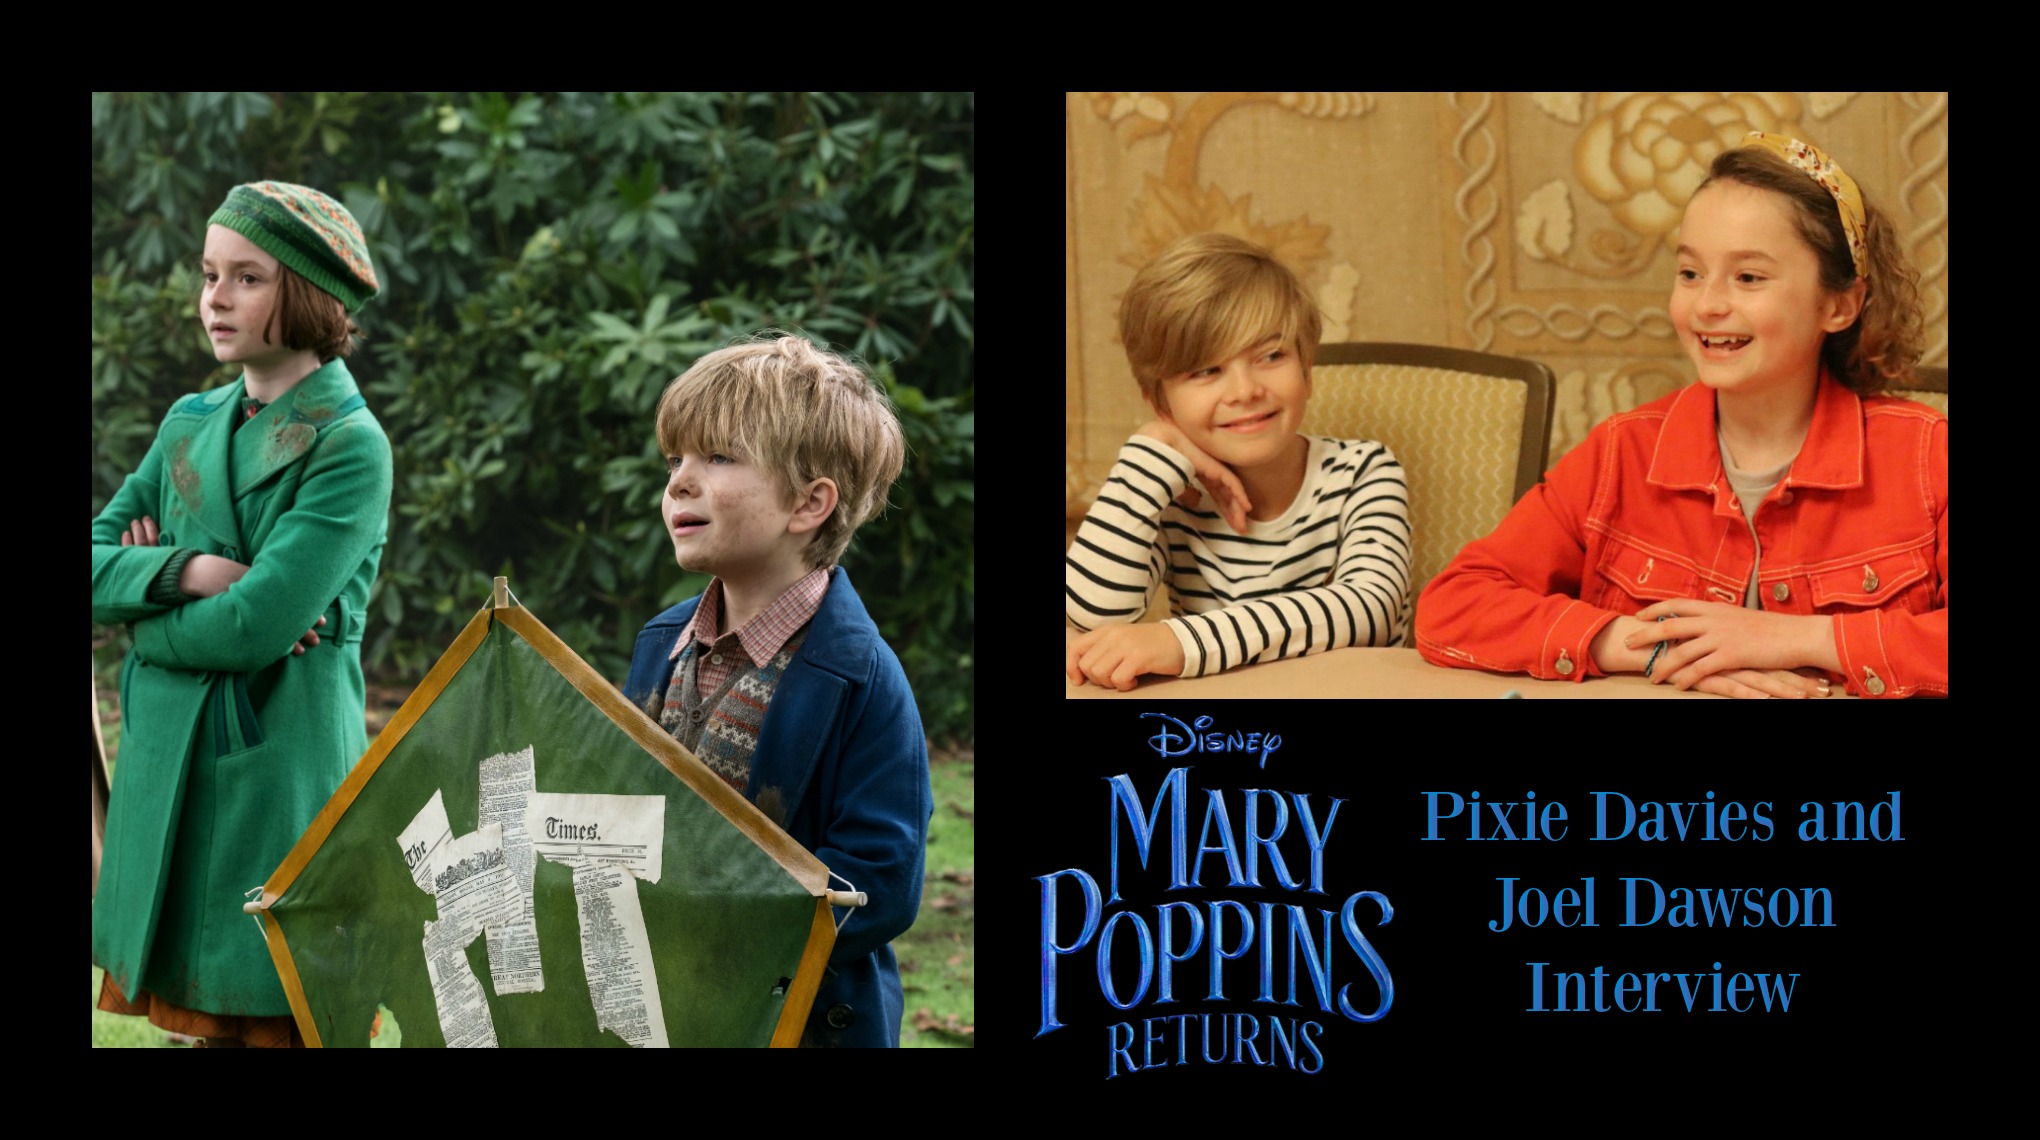 The kids of Mary Poppins returns